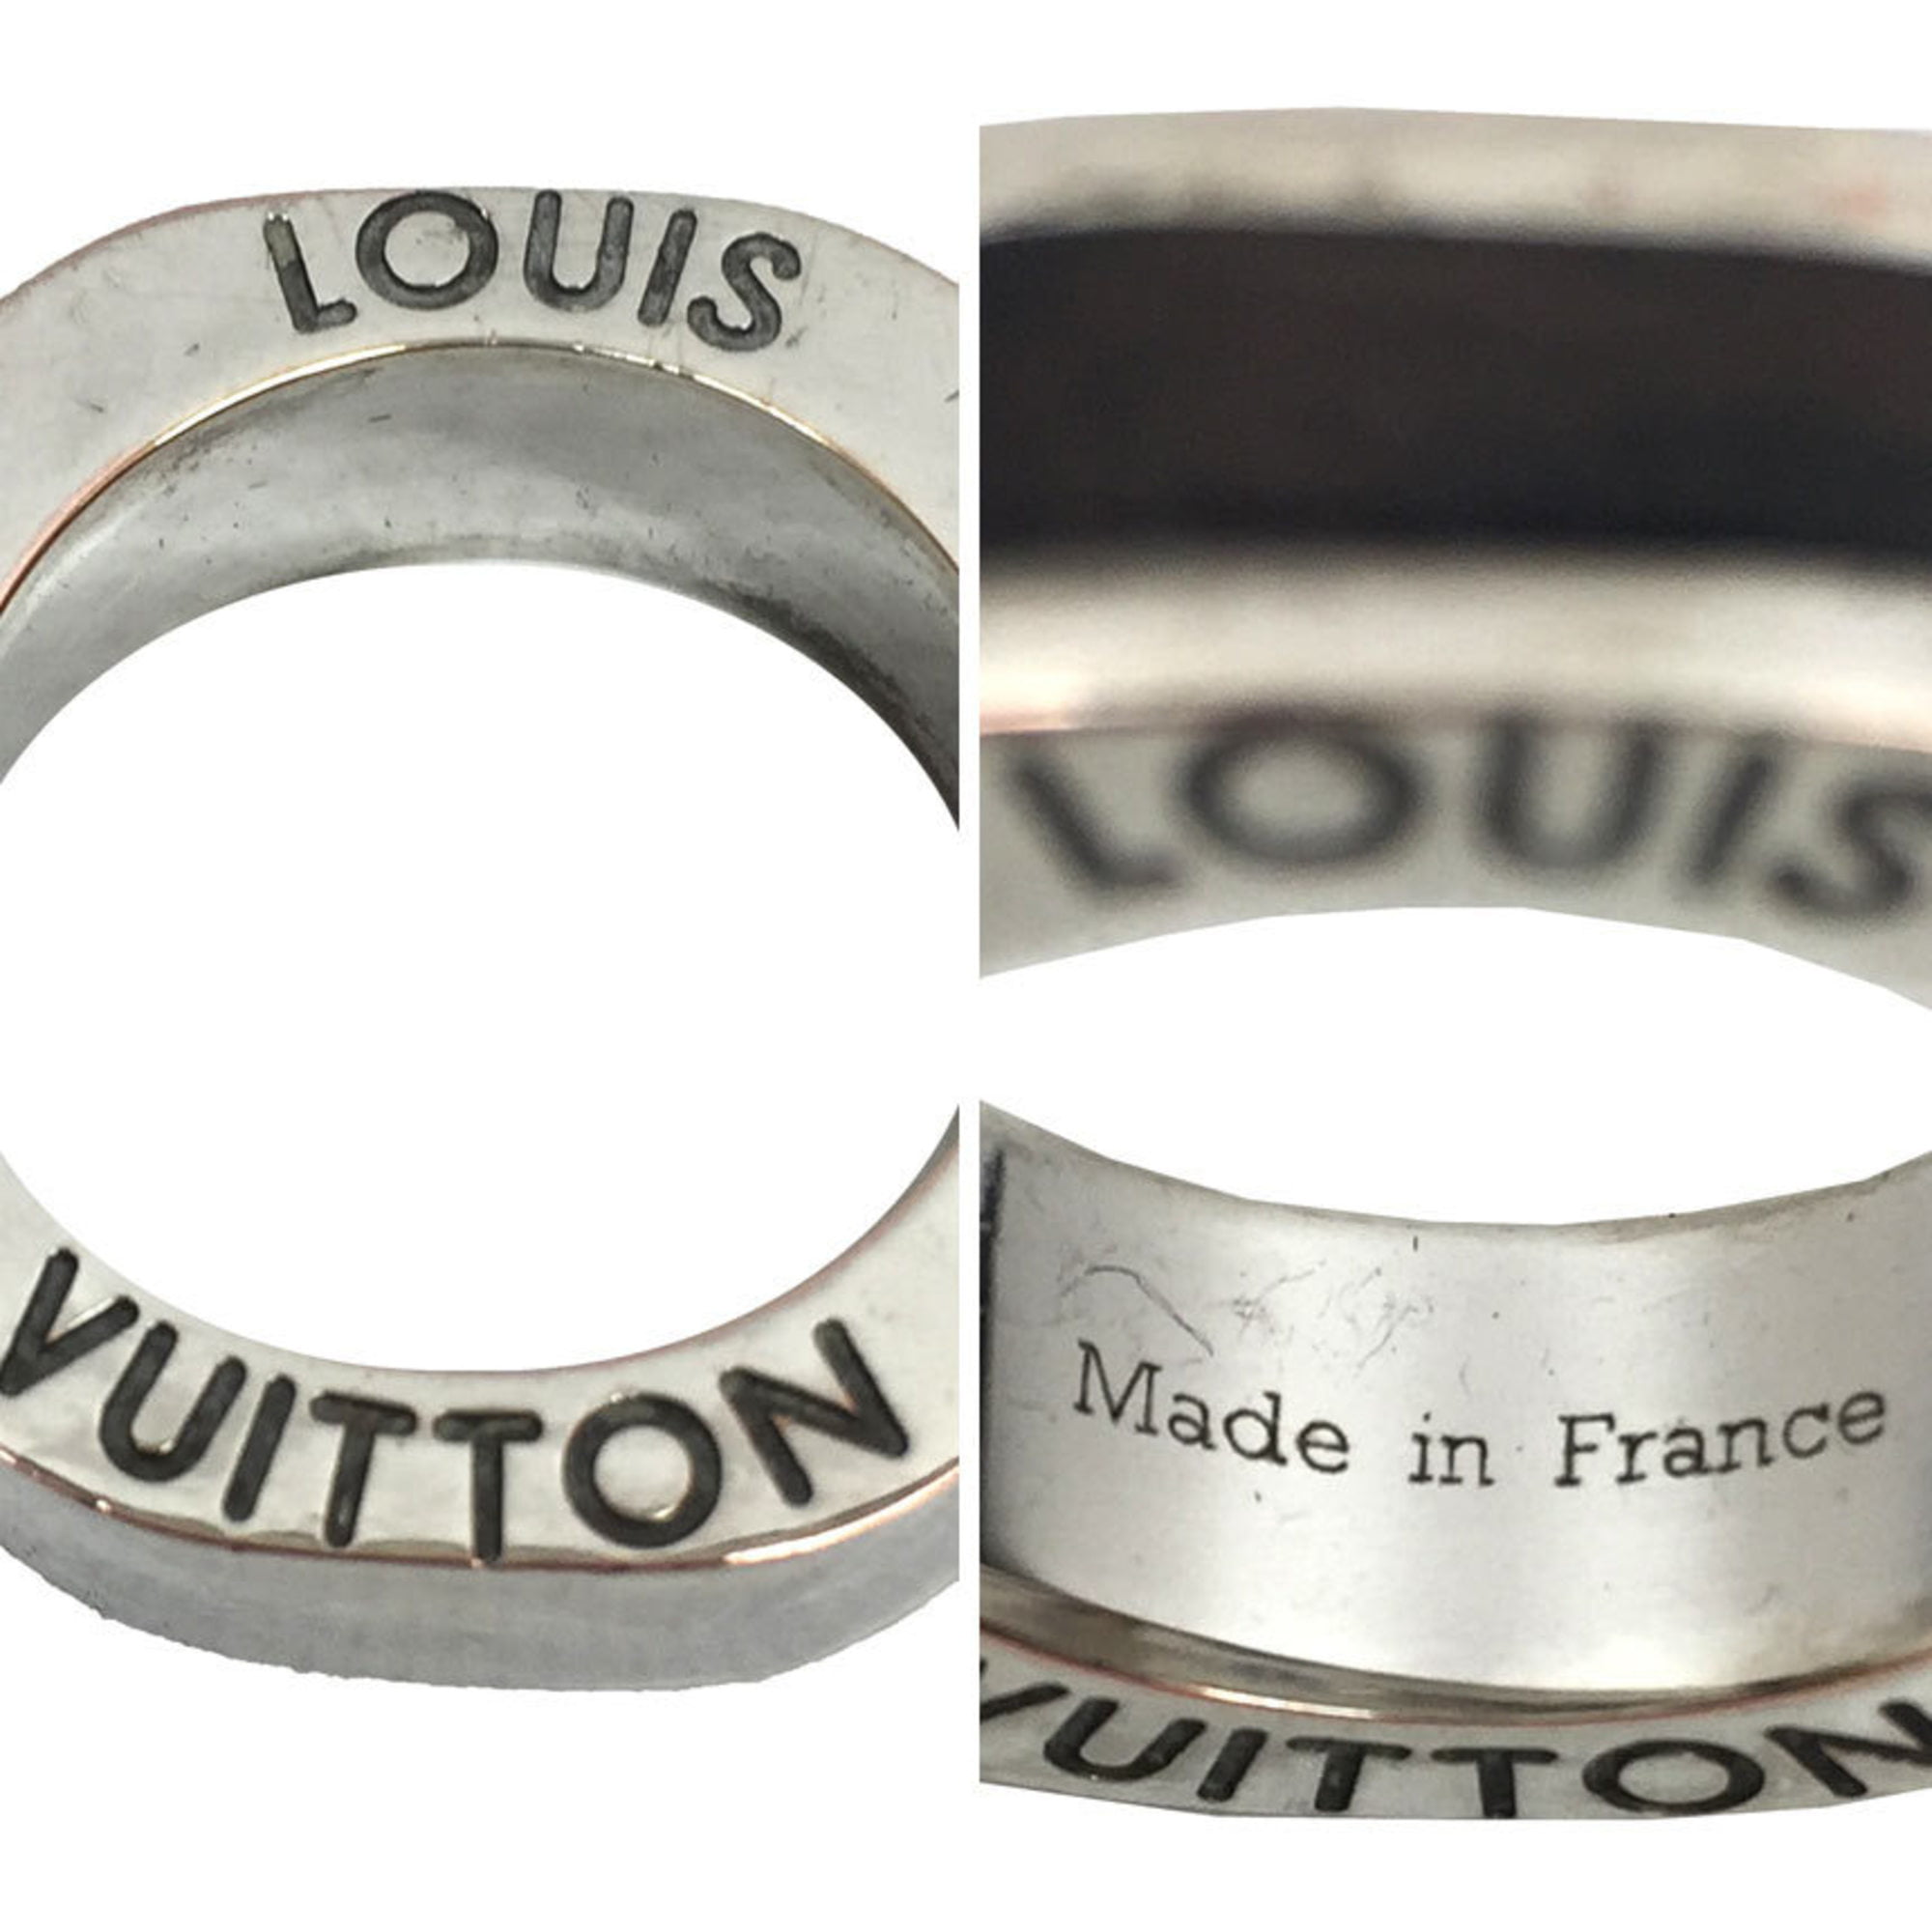 Louis Vuitton - Authenticated Nanogram Ring - Silver Silver for Women, Very Good Condition